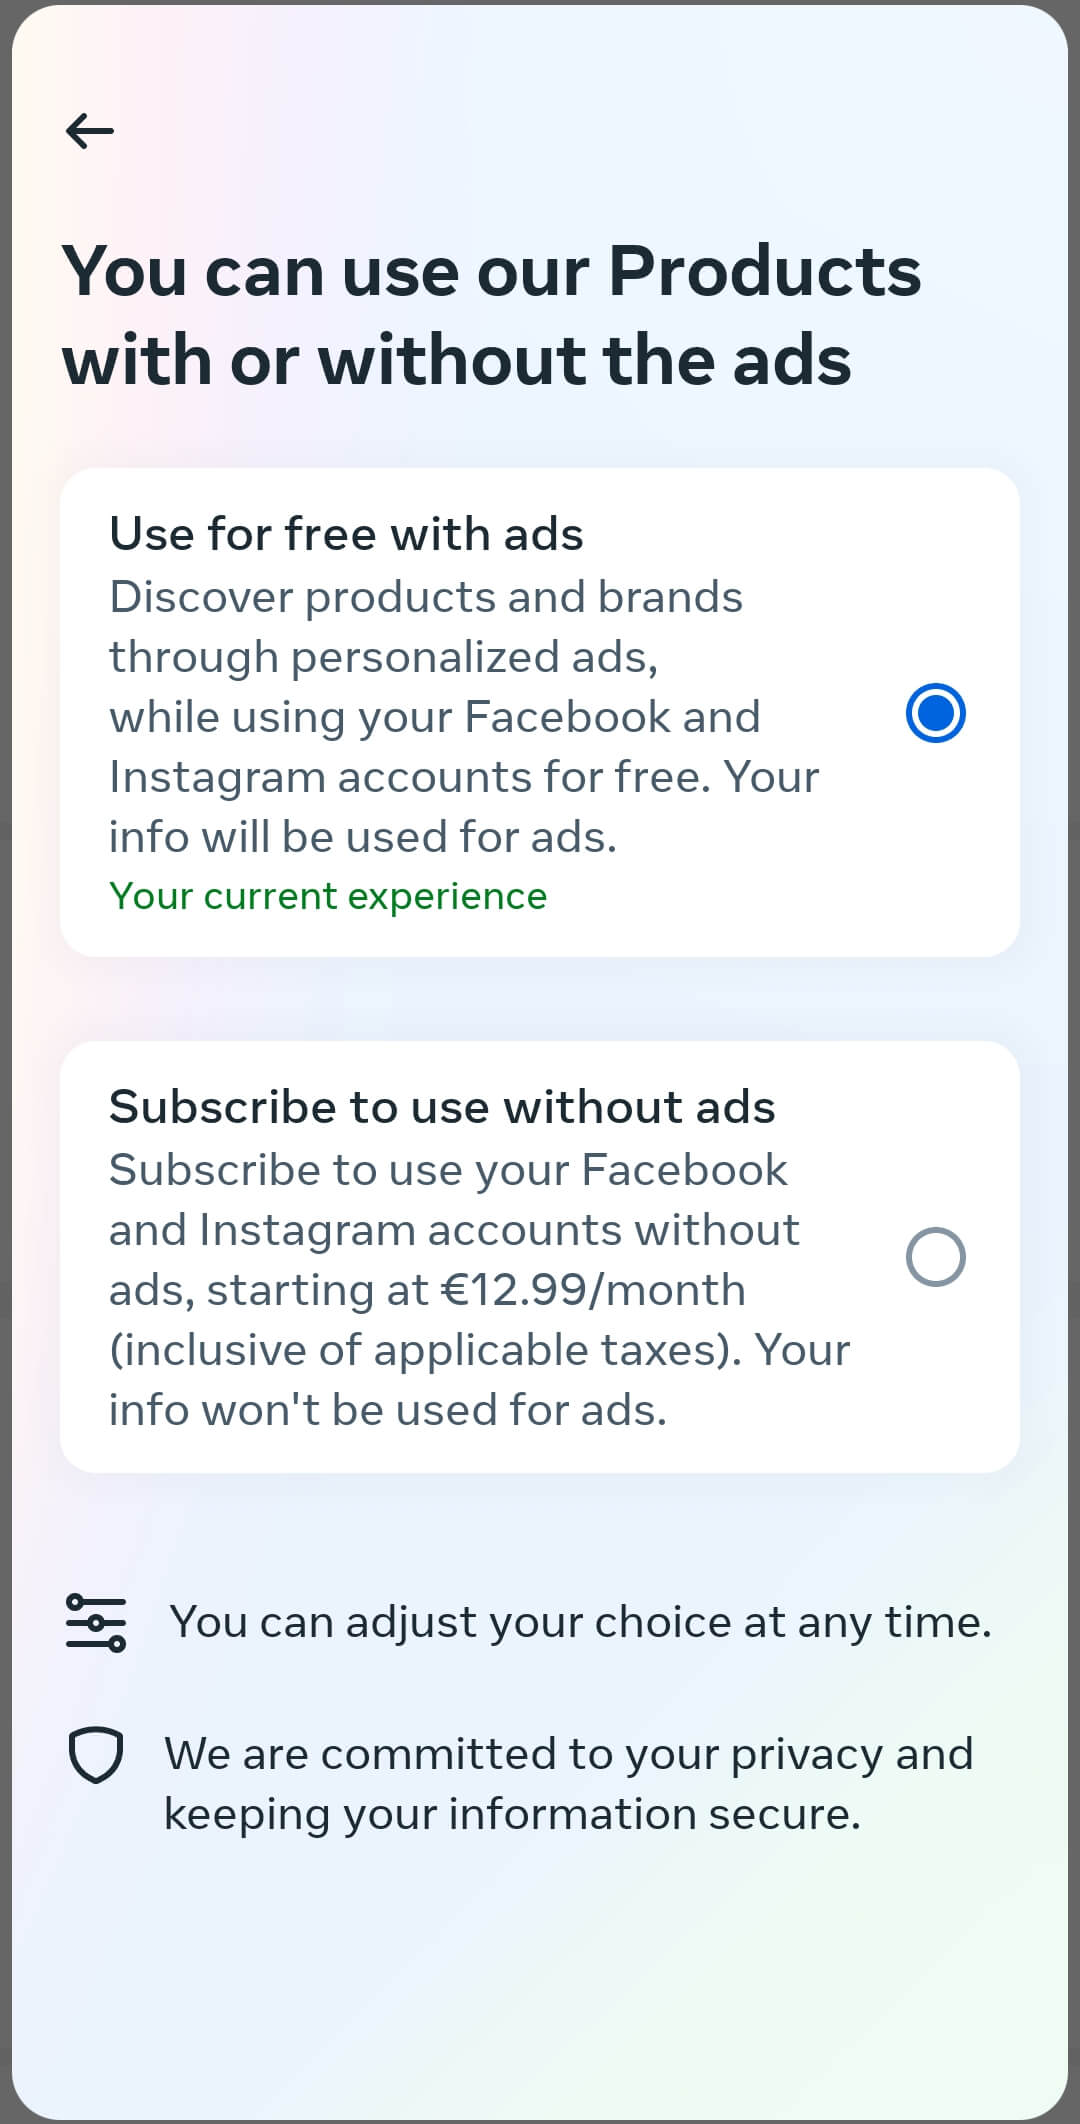 Choose between free with ads and a subscription without ads